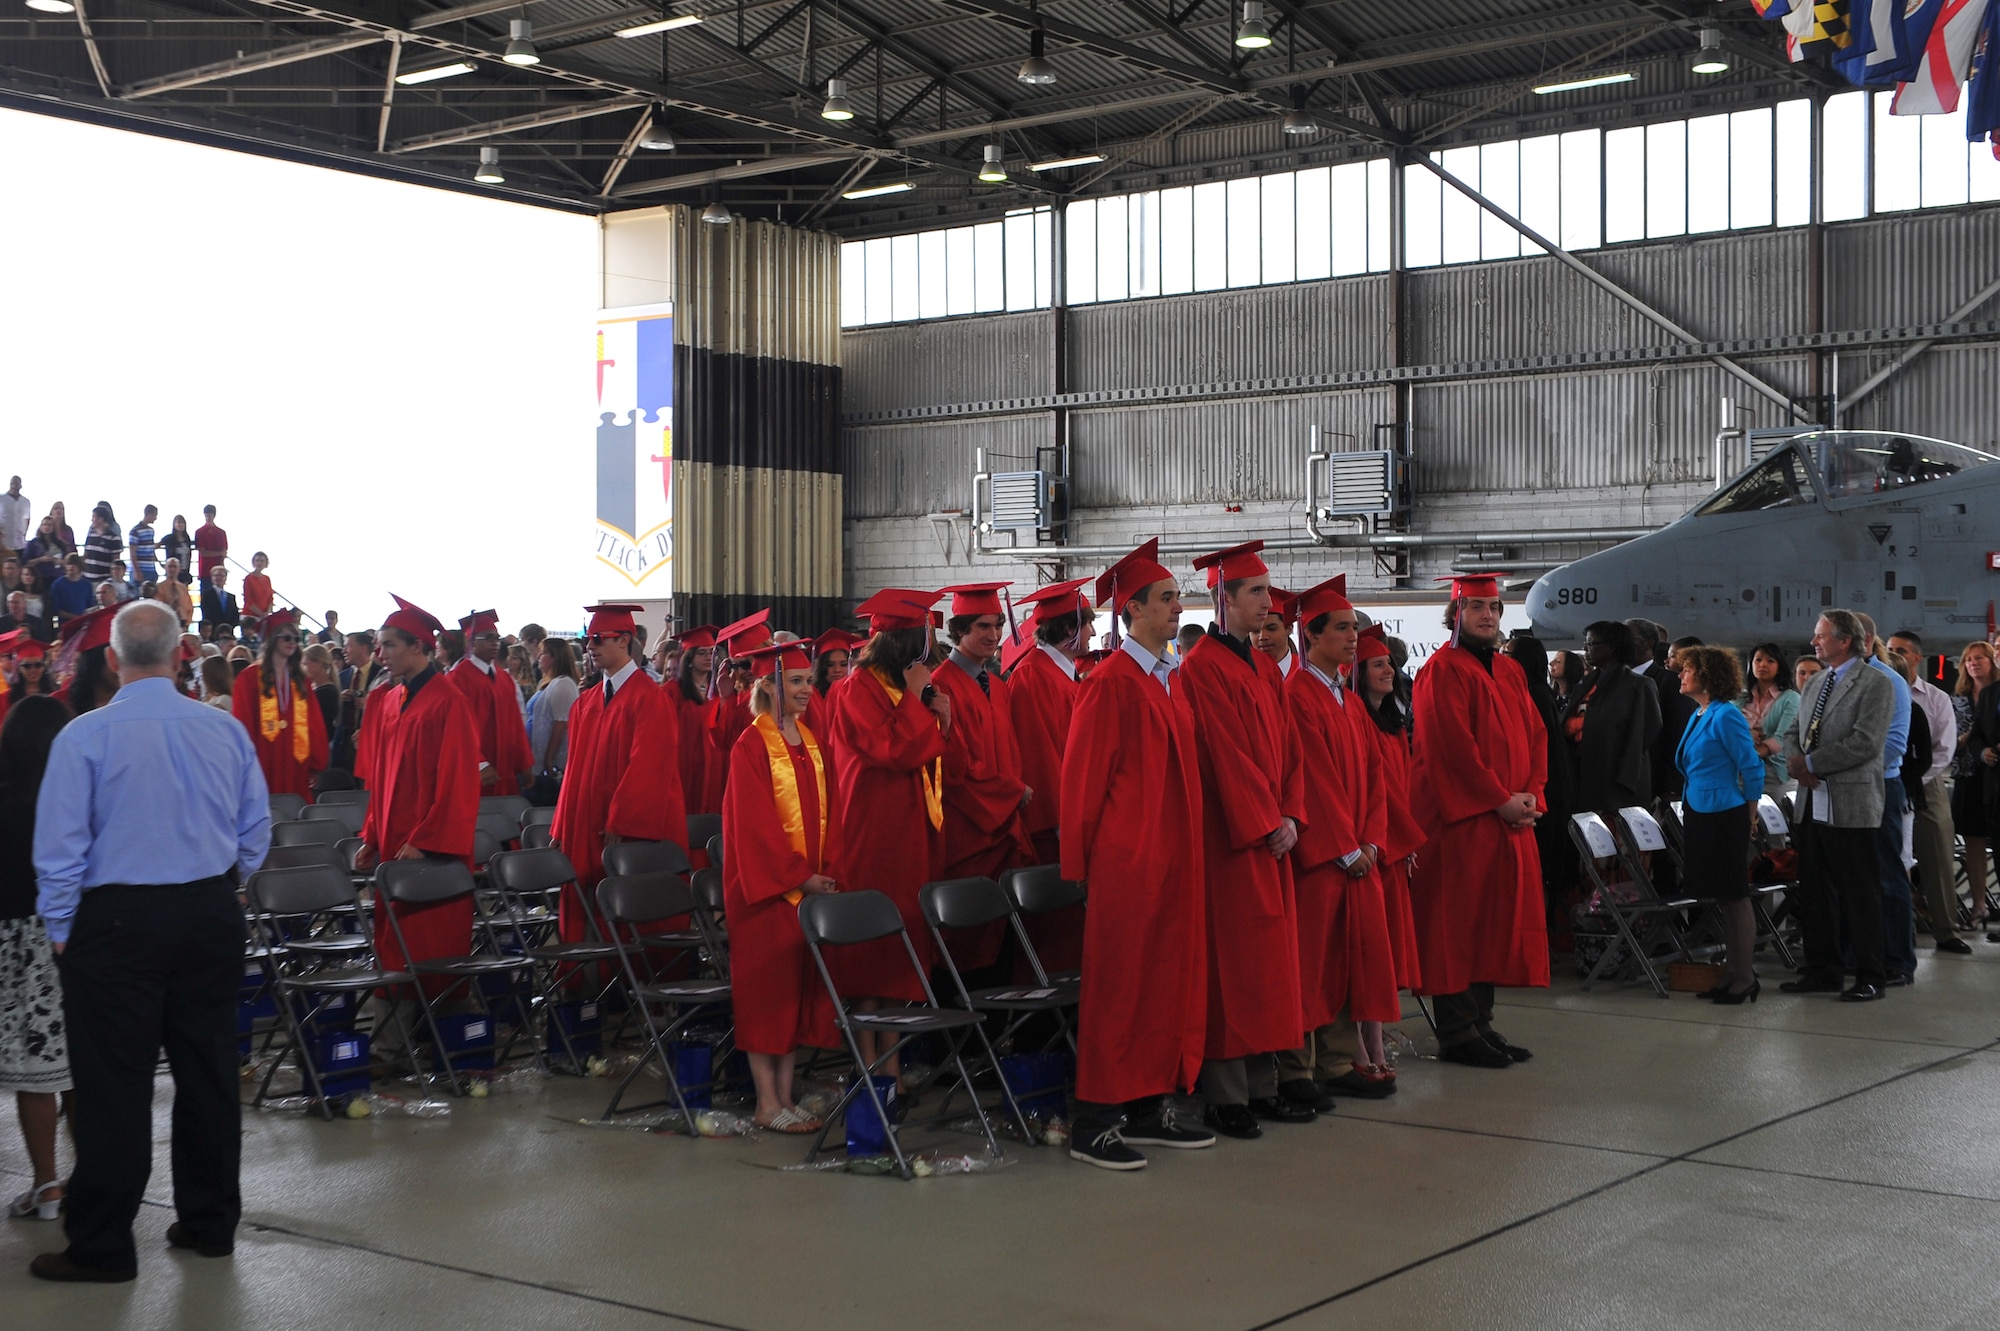 SPANGDAHLEM AIR BASE, Germany – Students of the Bitburg High School graduating class of 2012 file into their seats during the graduation ceremony inside Hangar 1 here June 9. The class of 2012 consisted of 54 students. More than 300 family members and guests attended the ceremony to celebrate the completion of their high school education. (U.S. Air Force photo by Airman 1st Class Dillon Davis/Released)